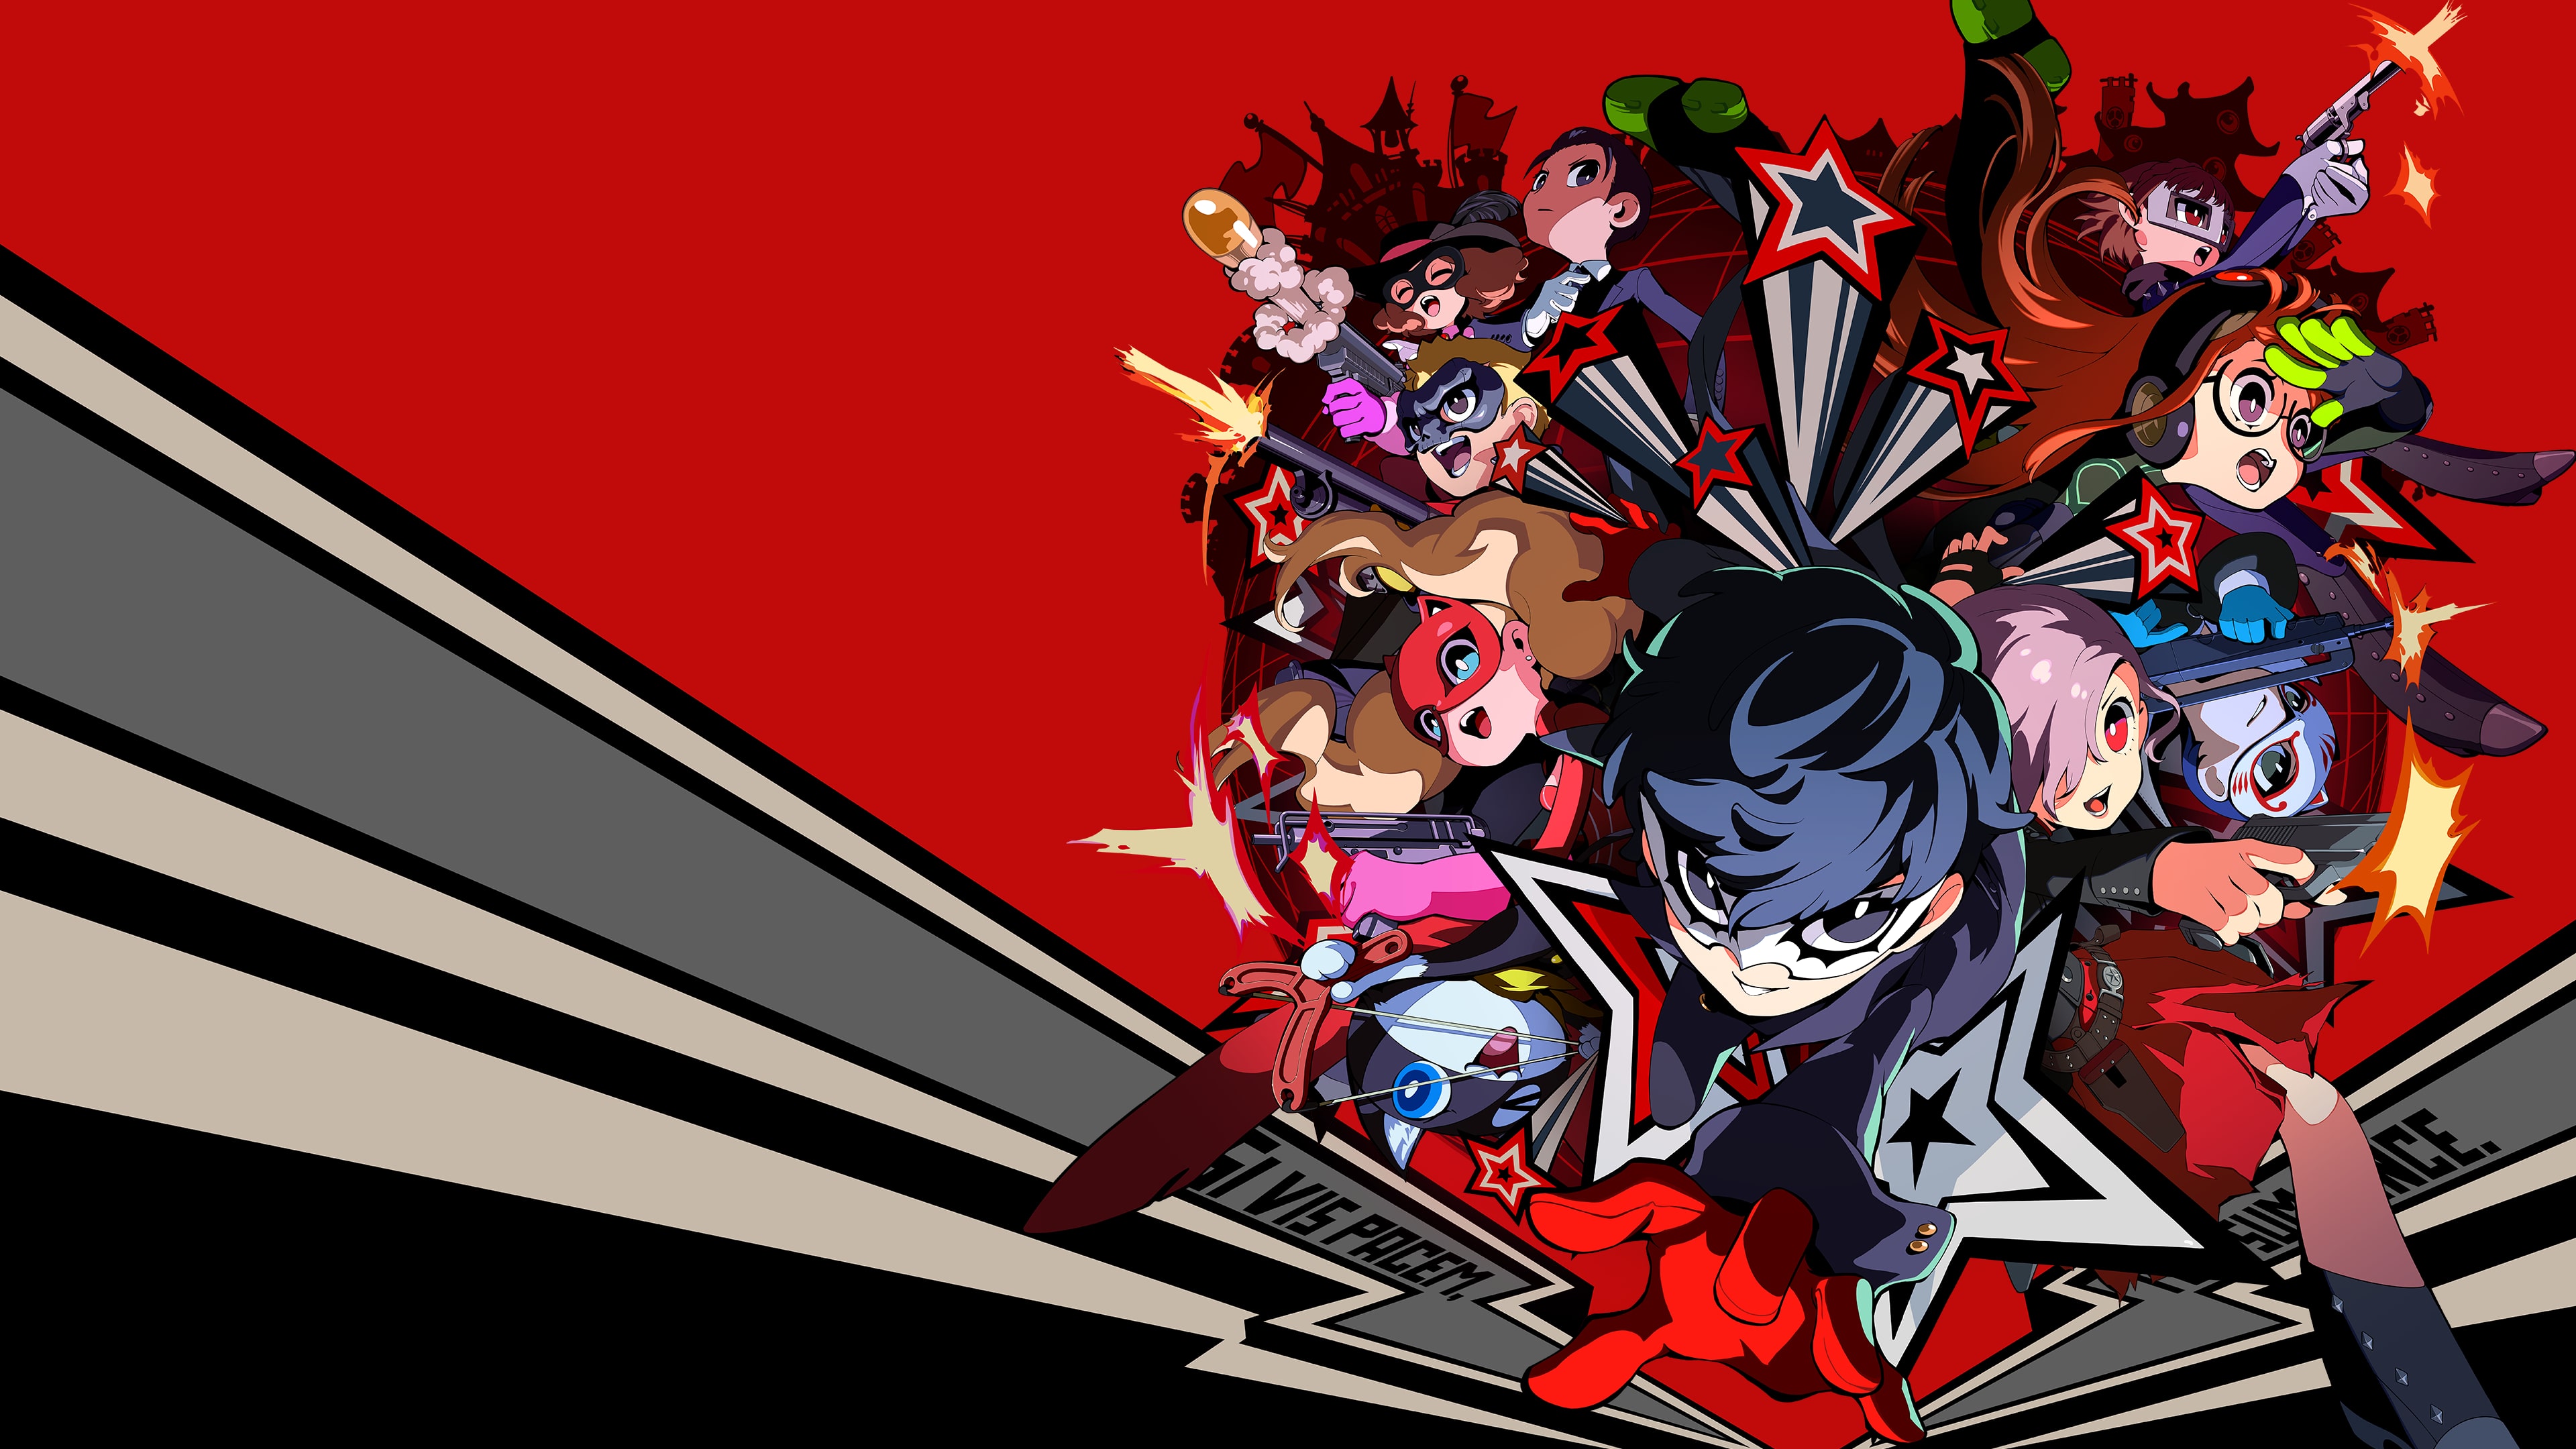 Persona 5 Tactica PS4 & PS5 (Simplified Chinese, English, Korean, Japanese, Traditional Chinese)